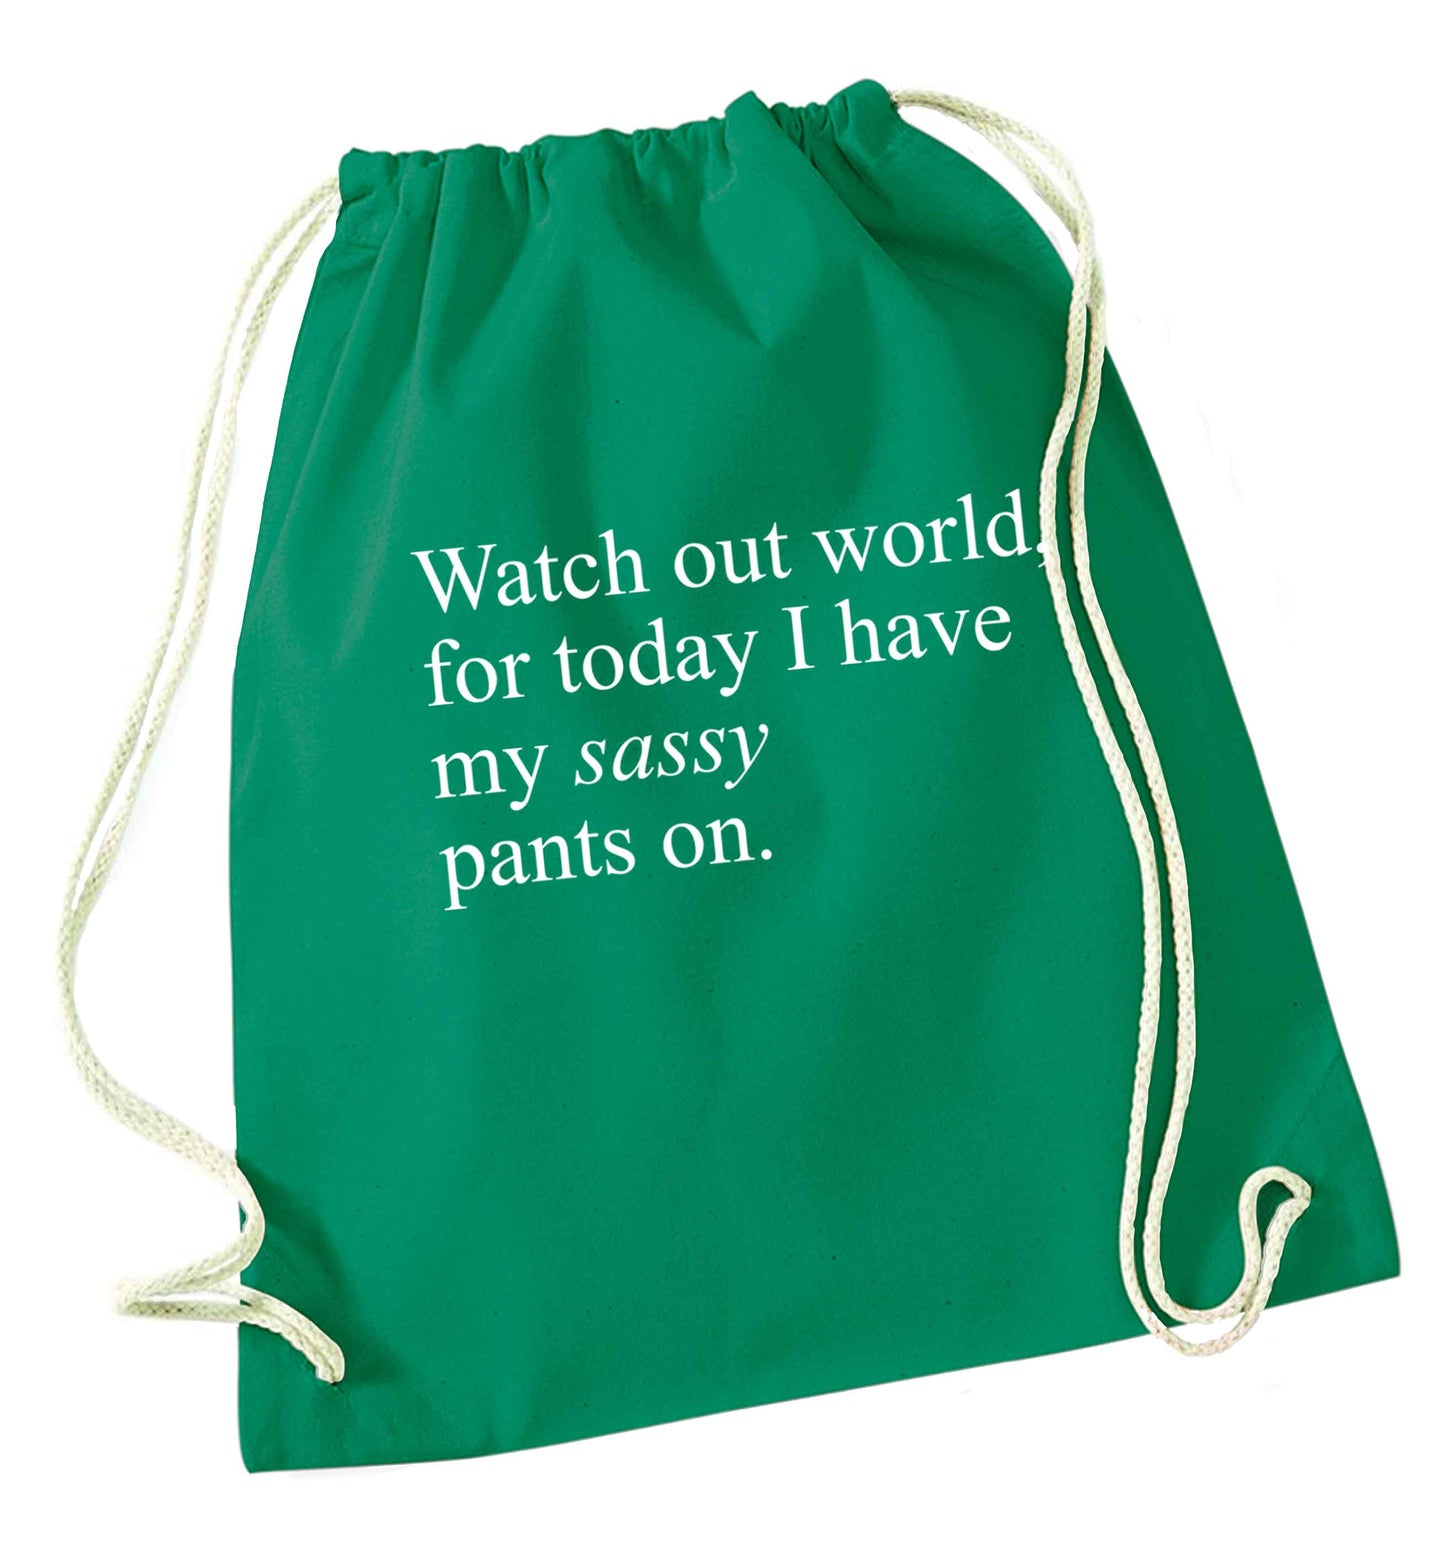 Watch out world for today I have my sassy pants on green drawstring bag